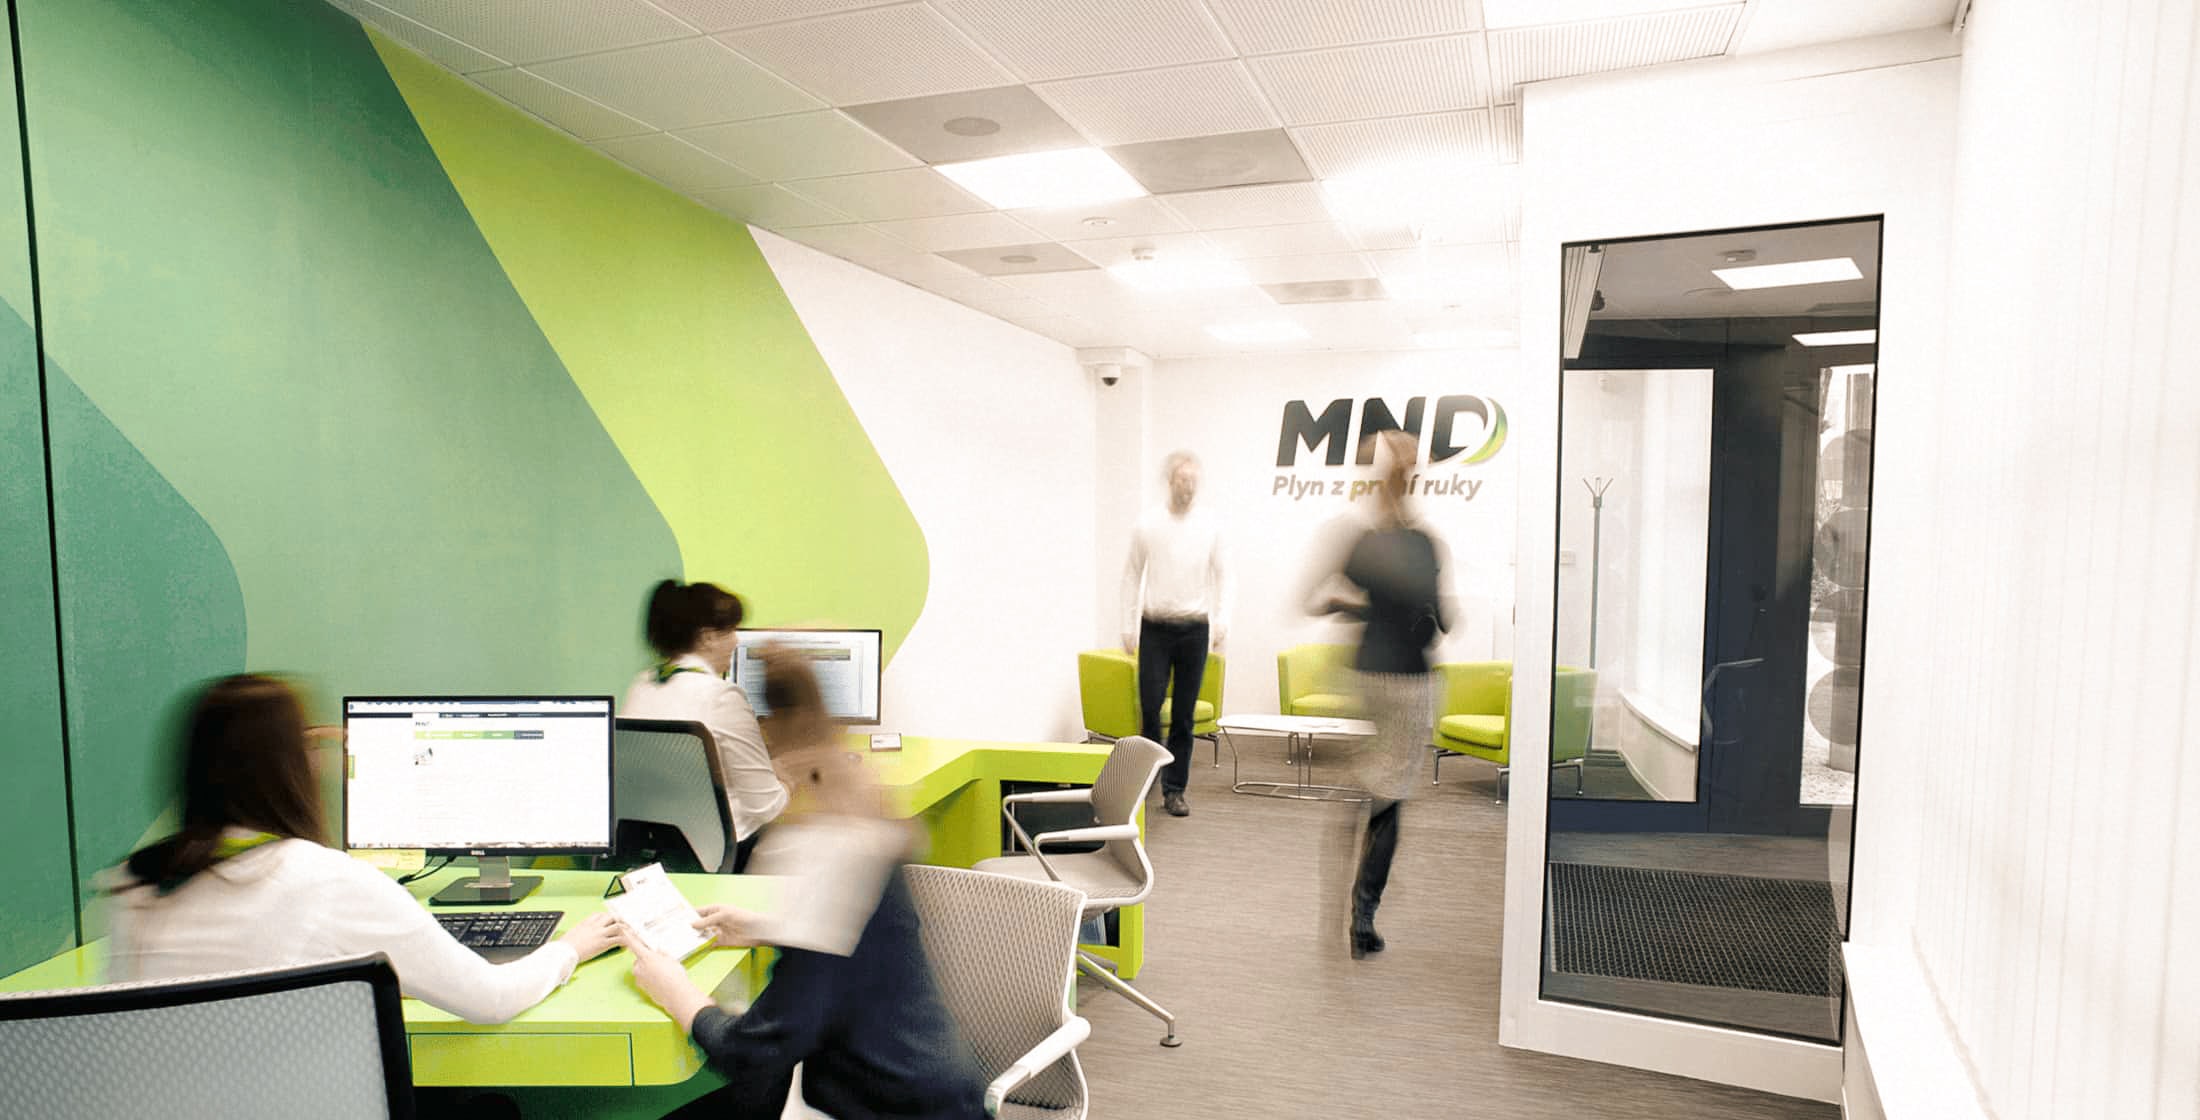 MND supplies energy to more than 119,000 customers